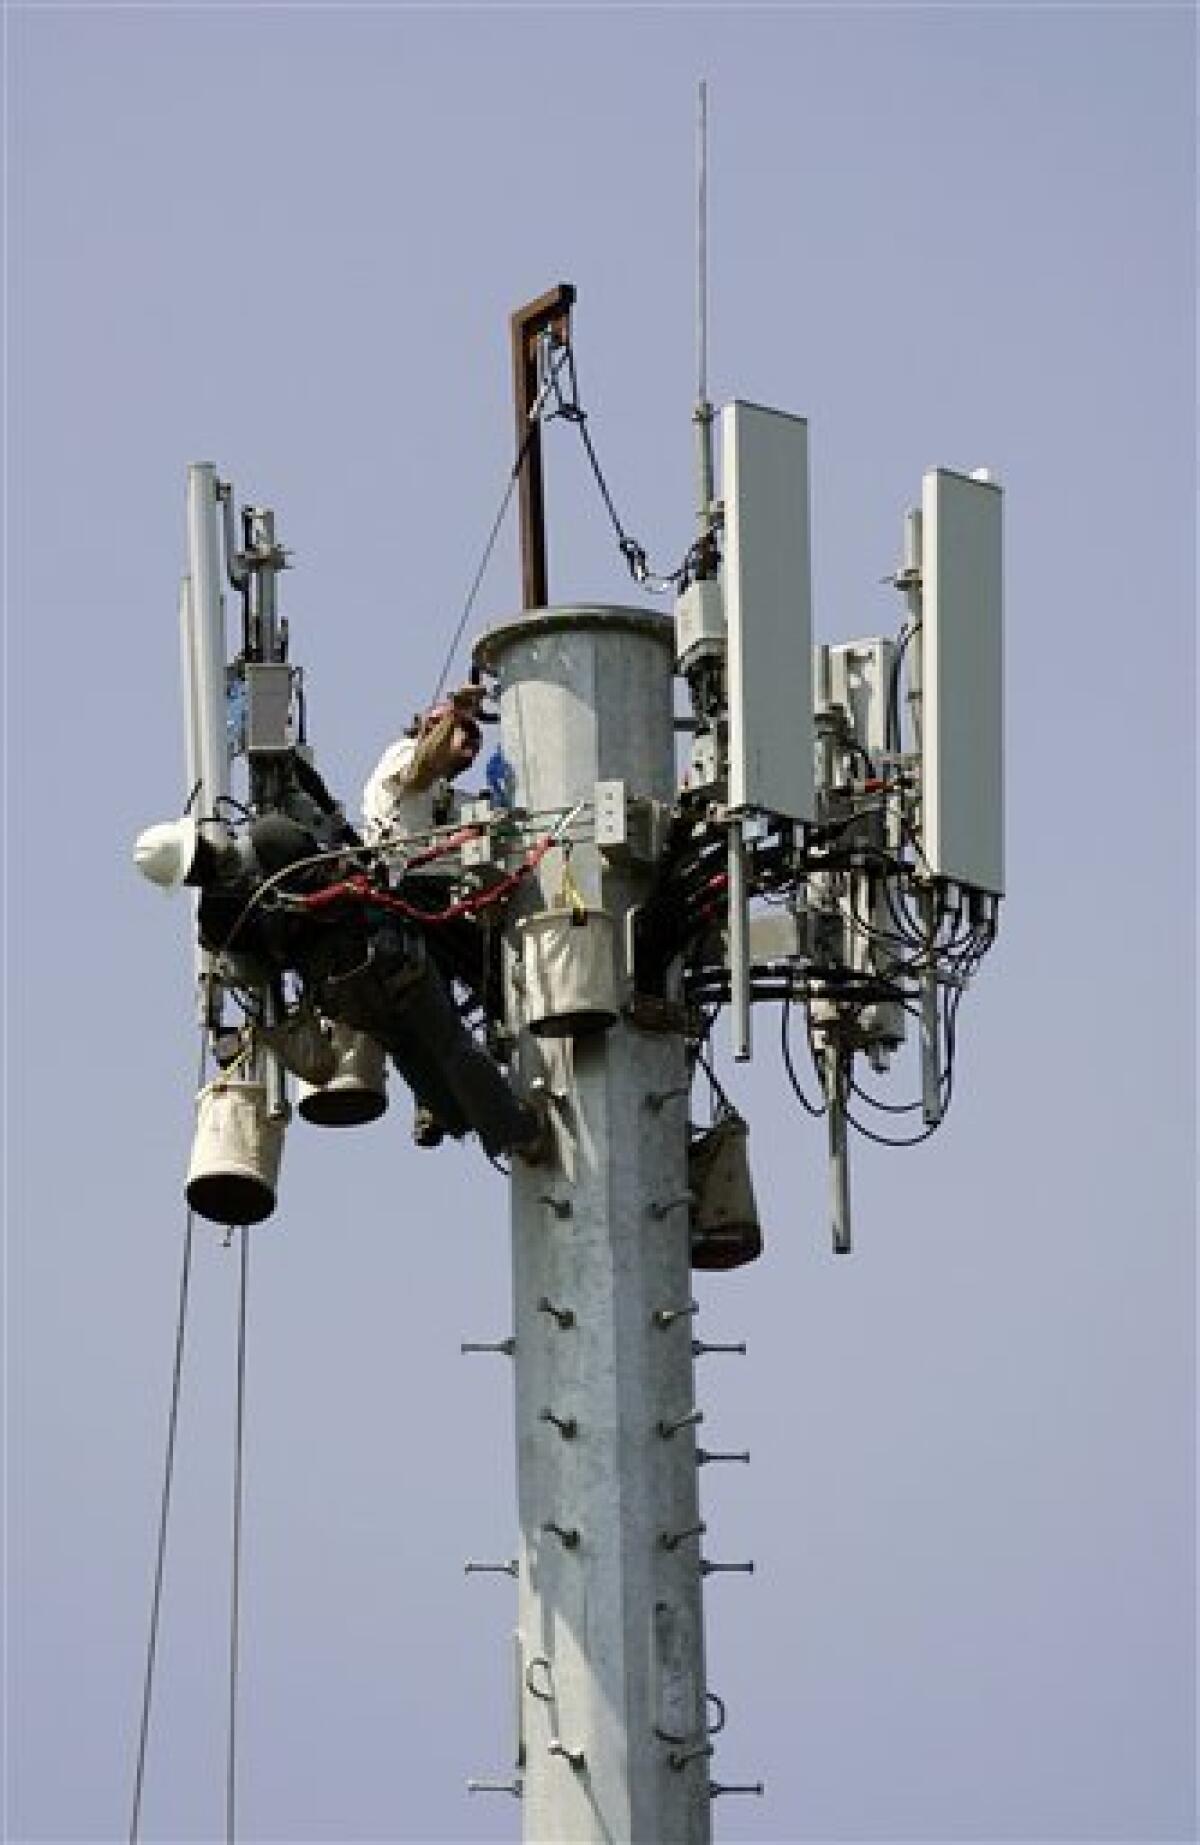 In this file photo taken July 16, 2008, workers are seen at the construction of a cellular telephone antenna tower in Lakewood, N.J.. A Long Island township has imposed restrictions on the placement of new cell towers that are among the toughest in the country, and one phone company said, Thursday, Sept. 23, 2010, it effectively bans new construction. (AP Photo/Mel Evans, File)